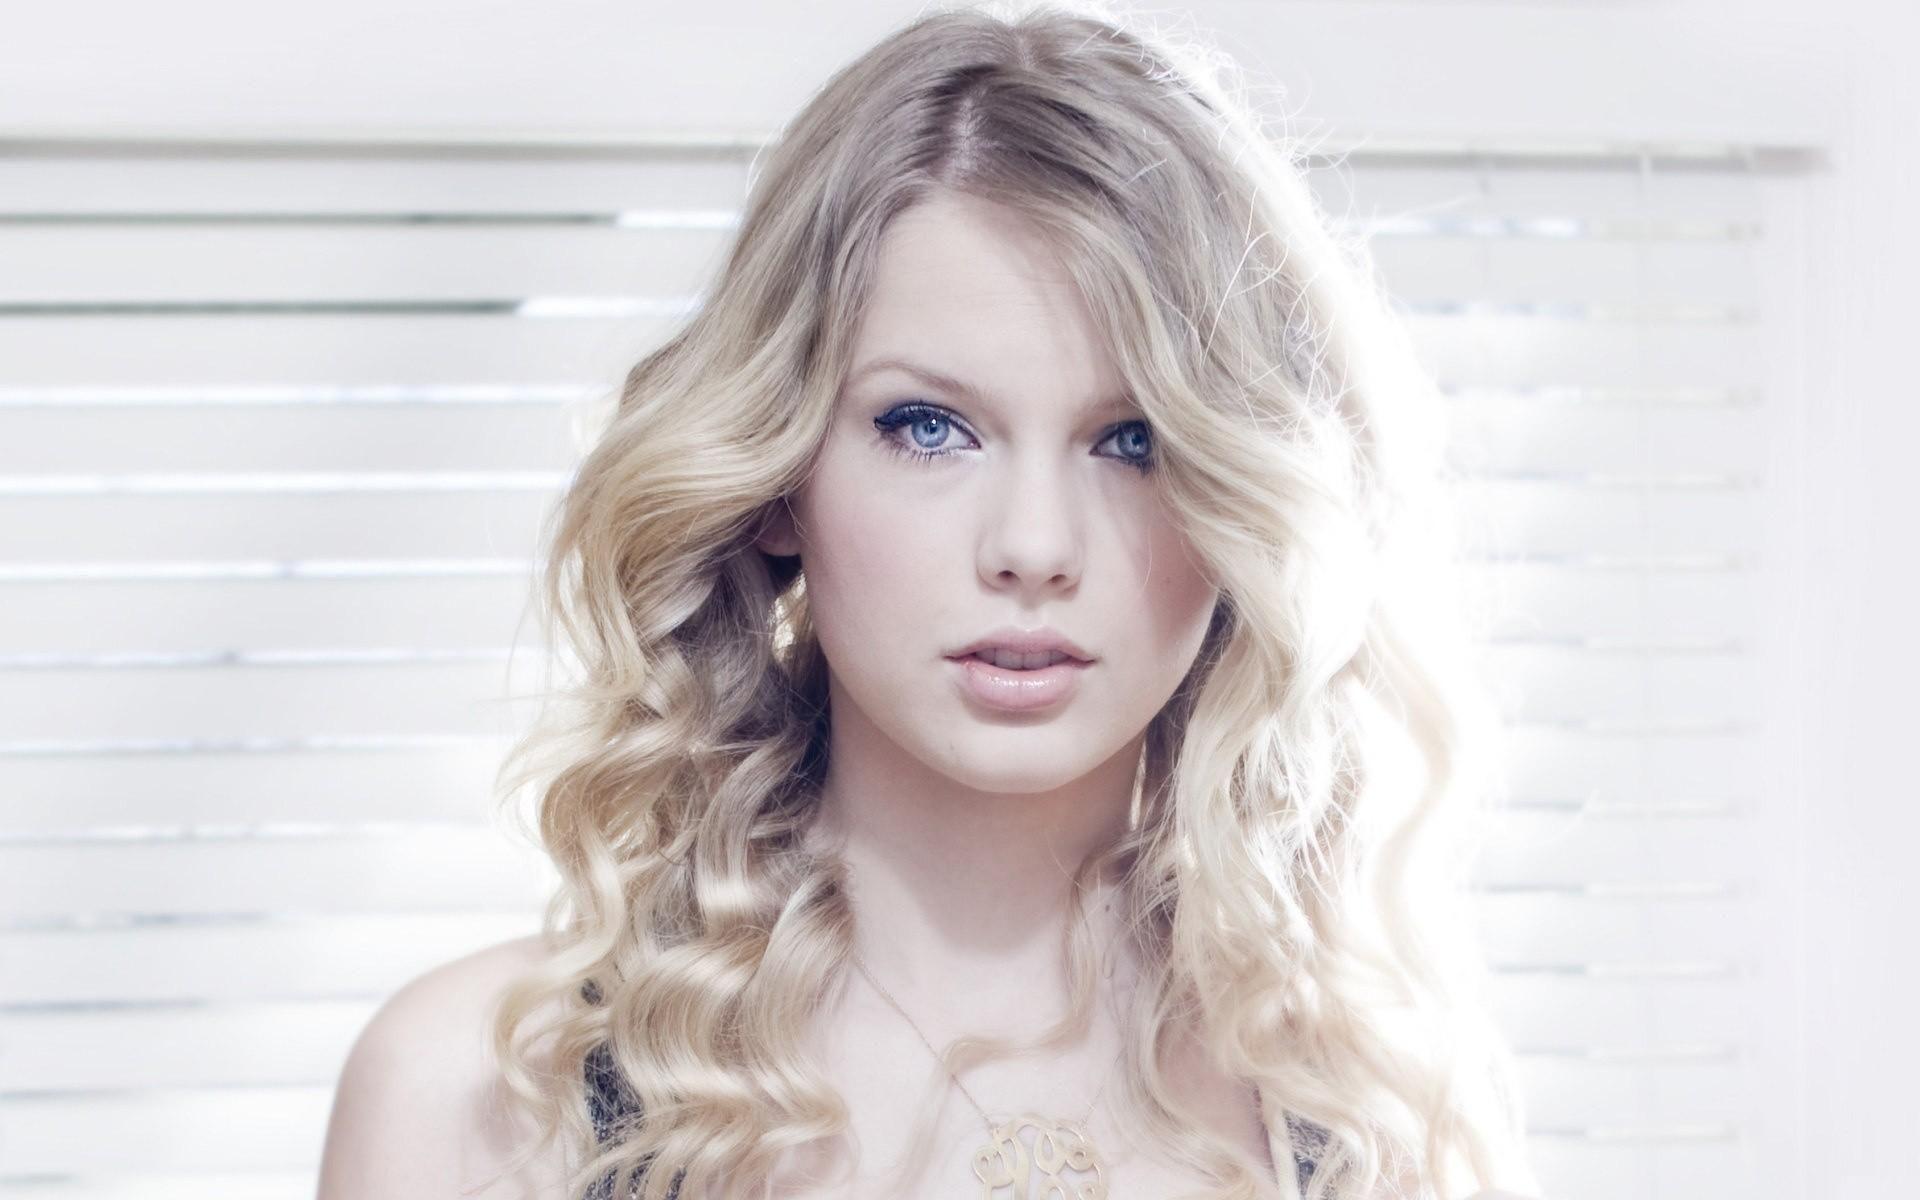 Taylor Swift Wallpaper, HD Taylor Swift Wallpaper for Free, Picture